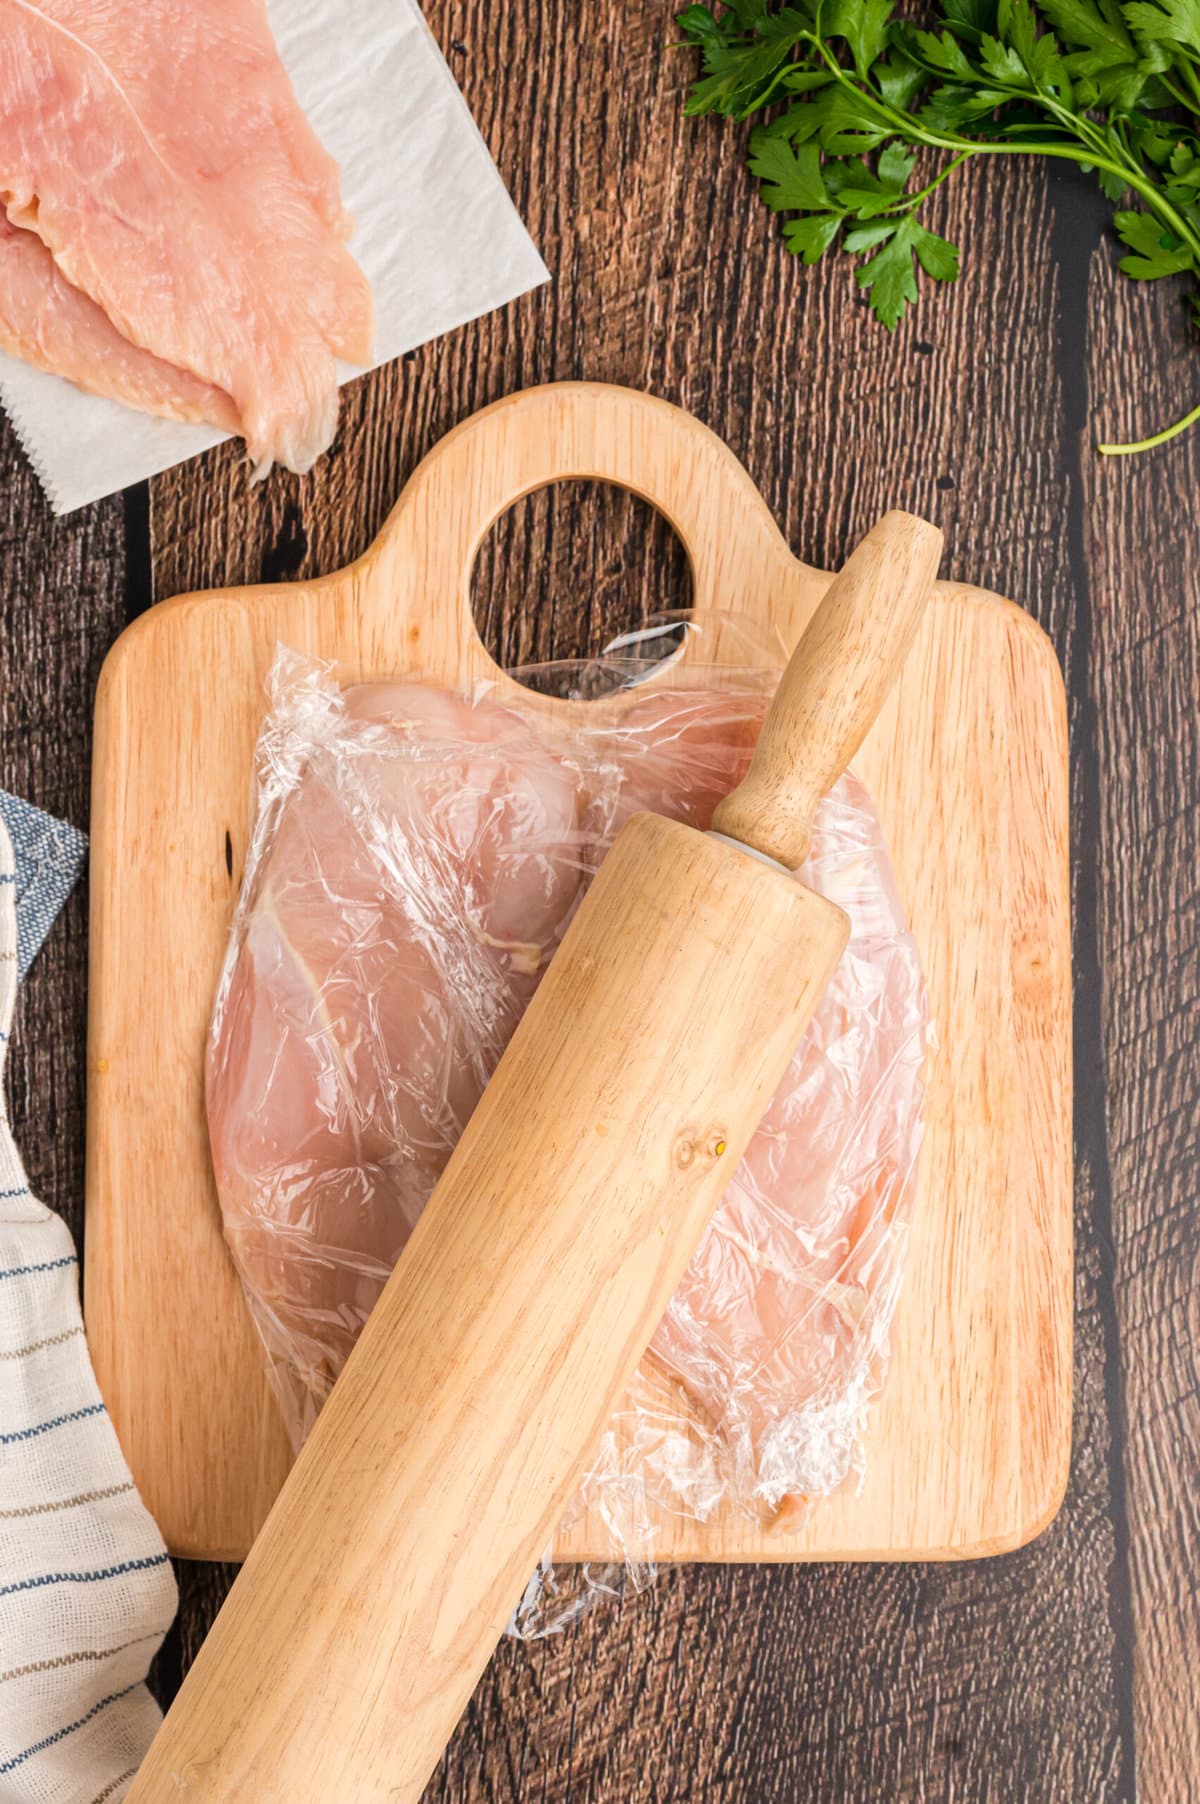 A rolling pin flattening chicken breasts